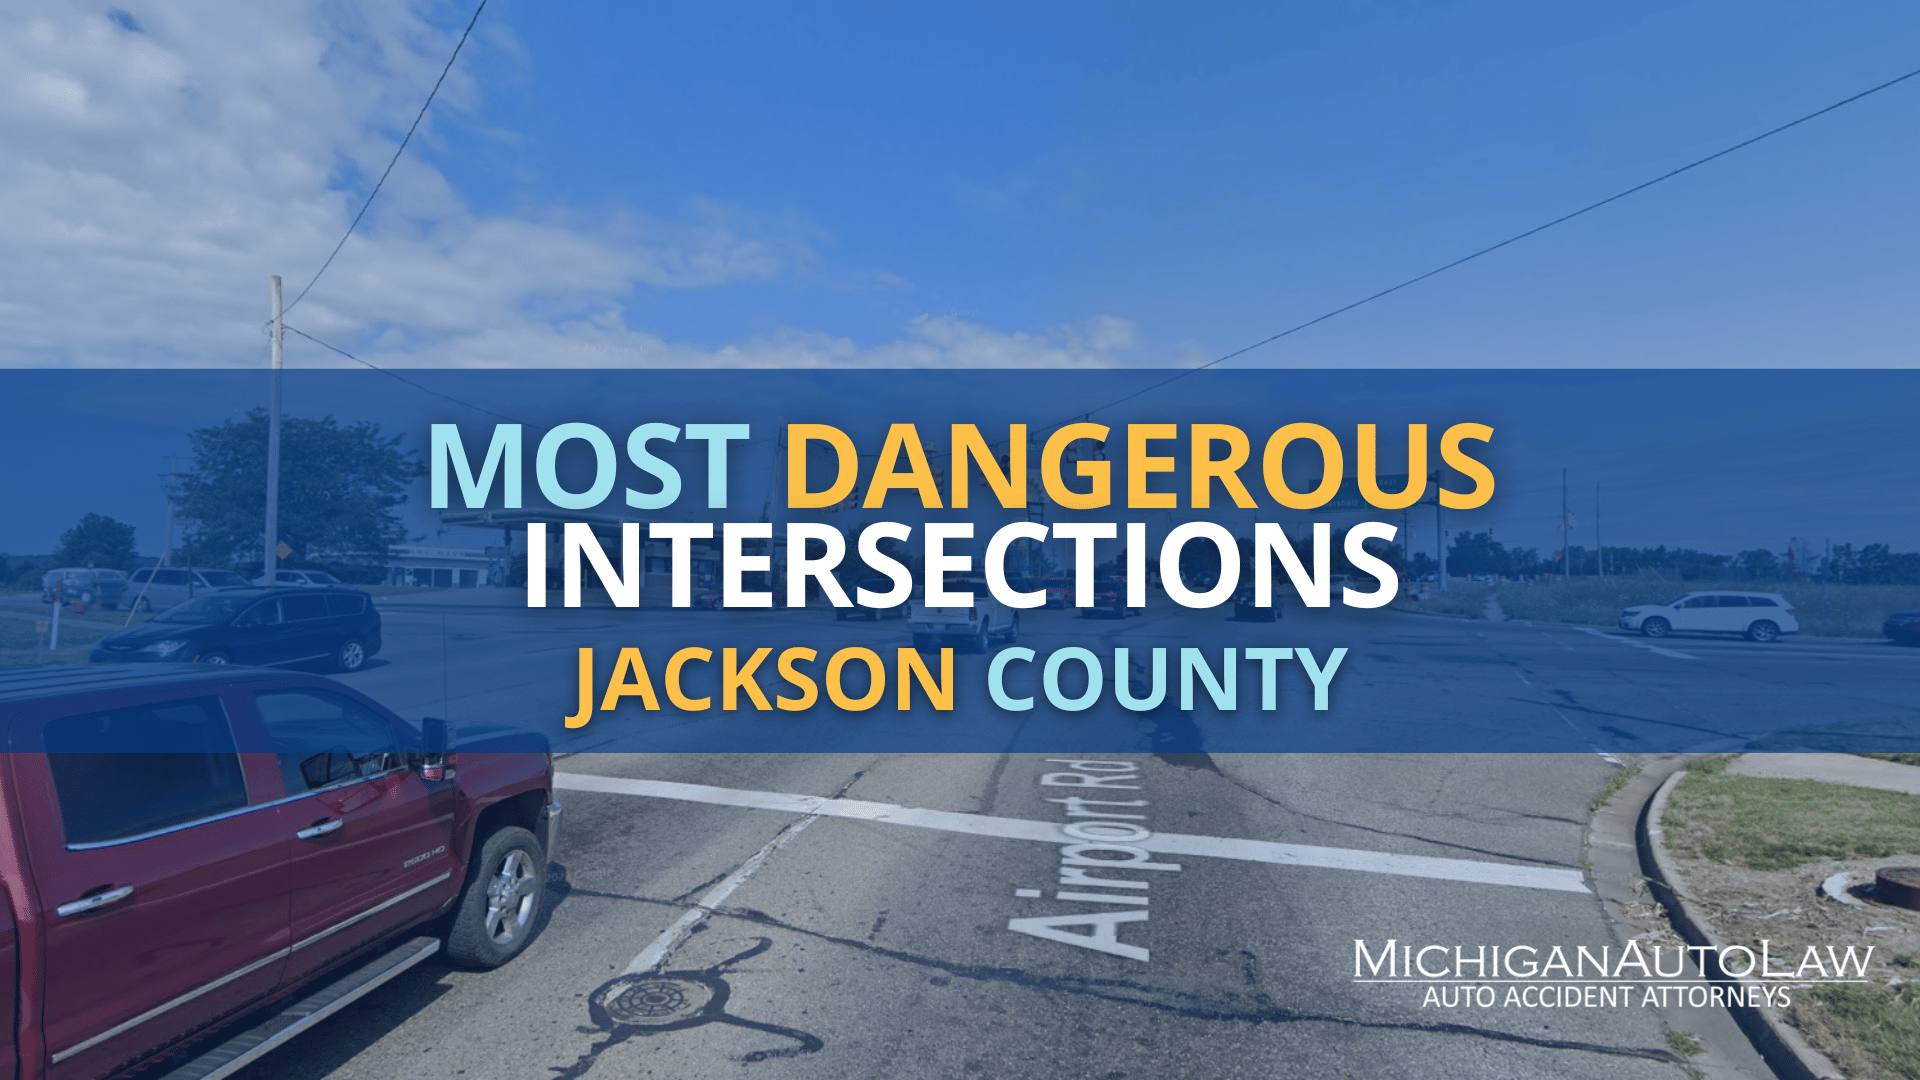 Jackson County’s Most Dangerous Intersections in 2021